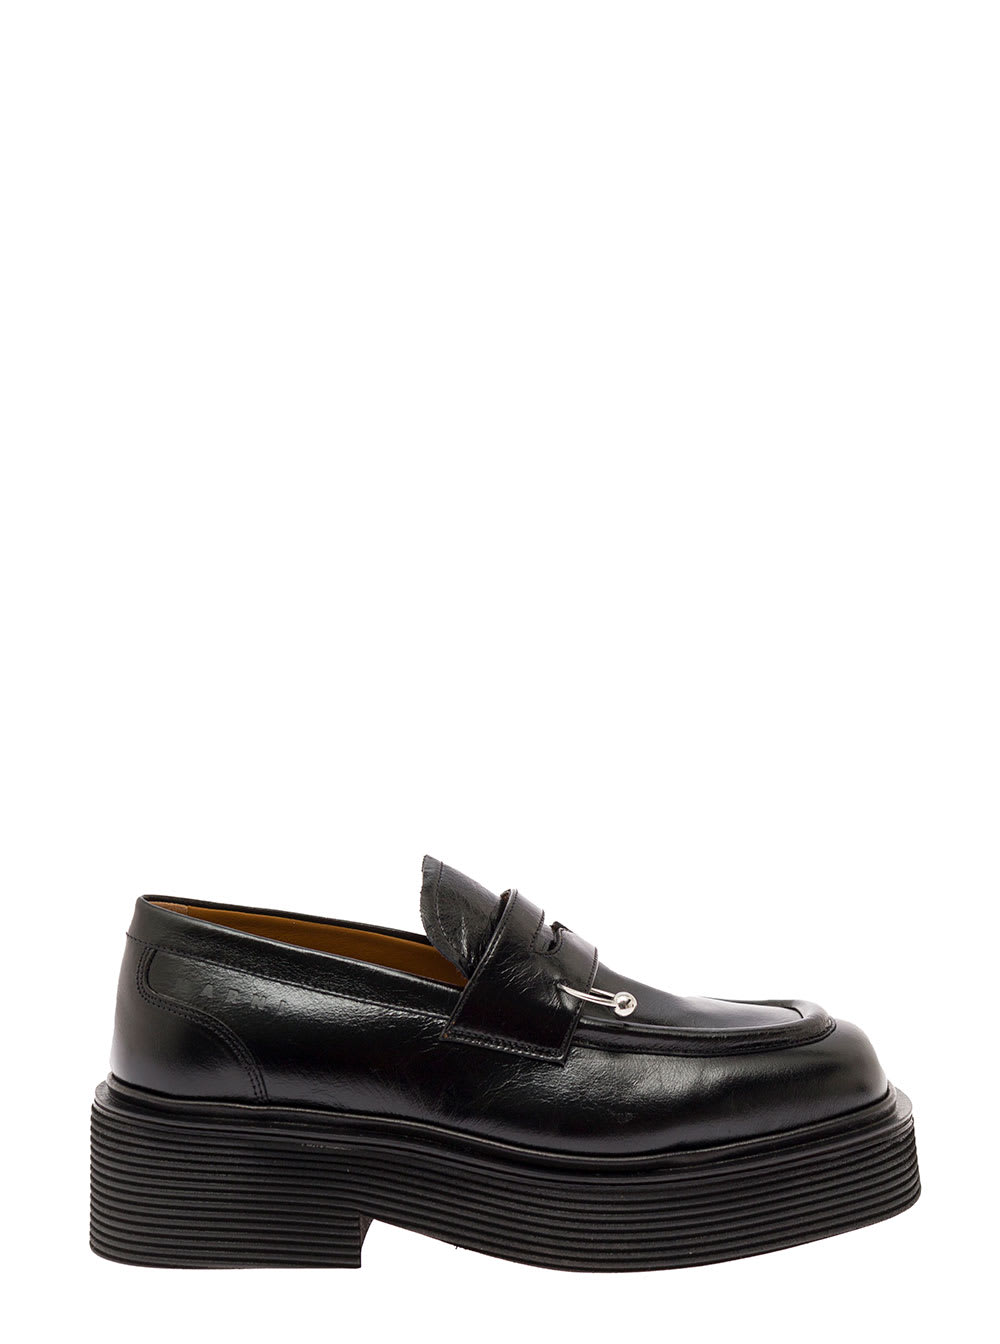 Black Loafer In Leather With Iconic Square Toe Marni Woman